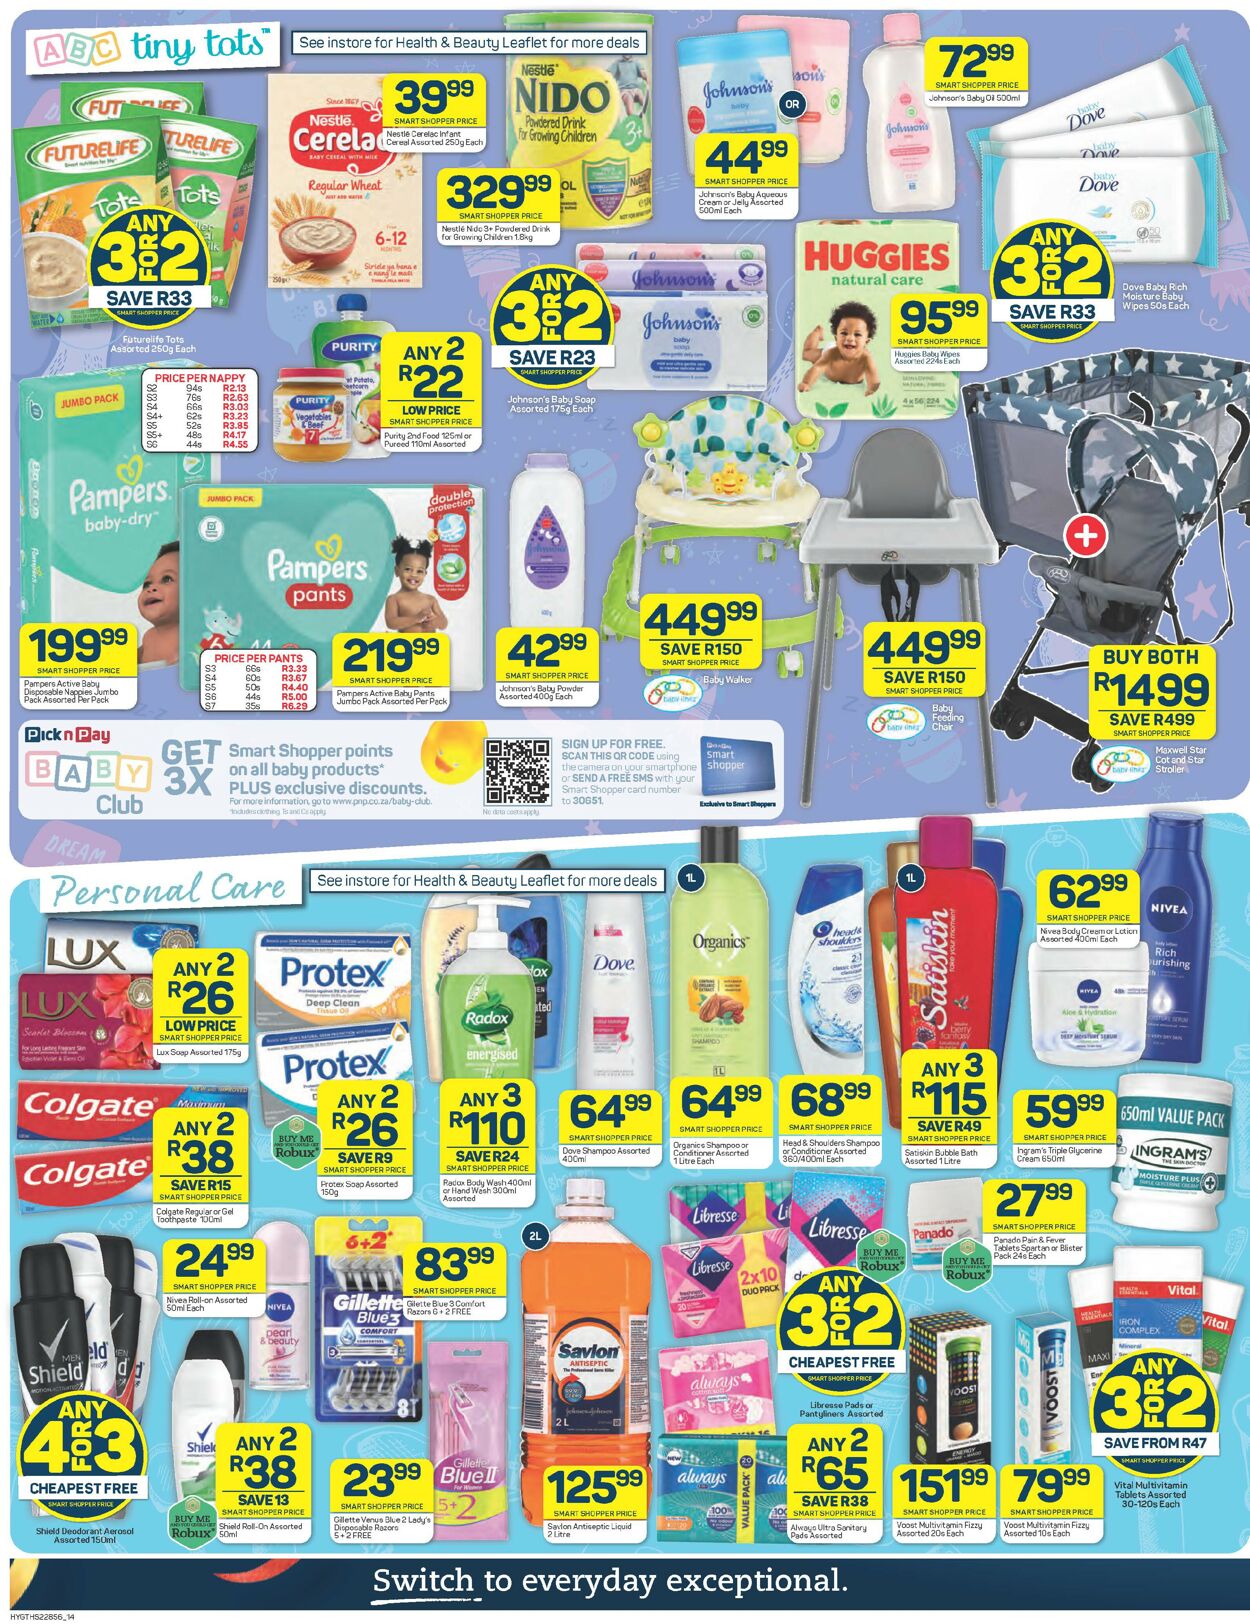 Pick n Pay Catalogue - 2023/06/19-2023/06/25 (Page 14)